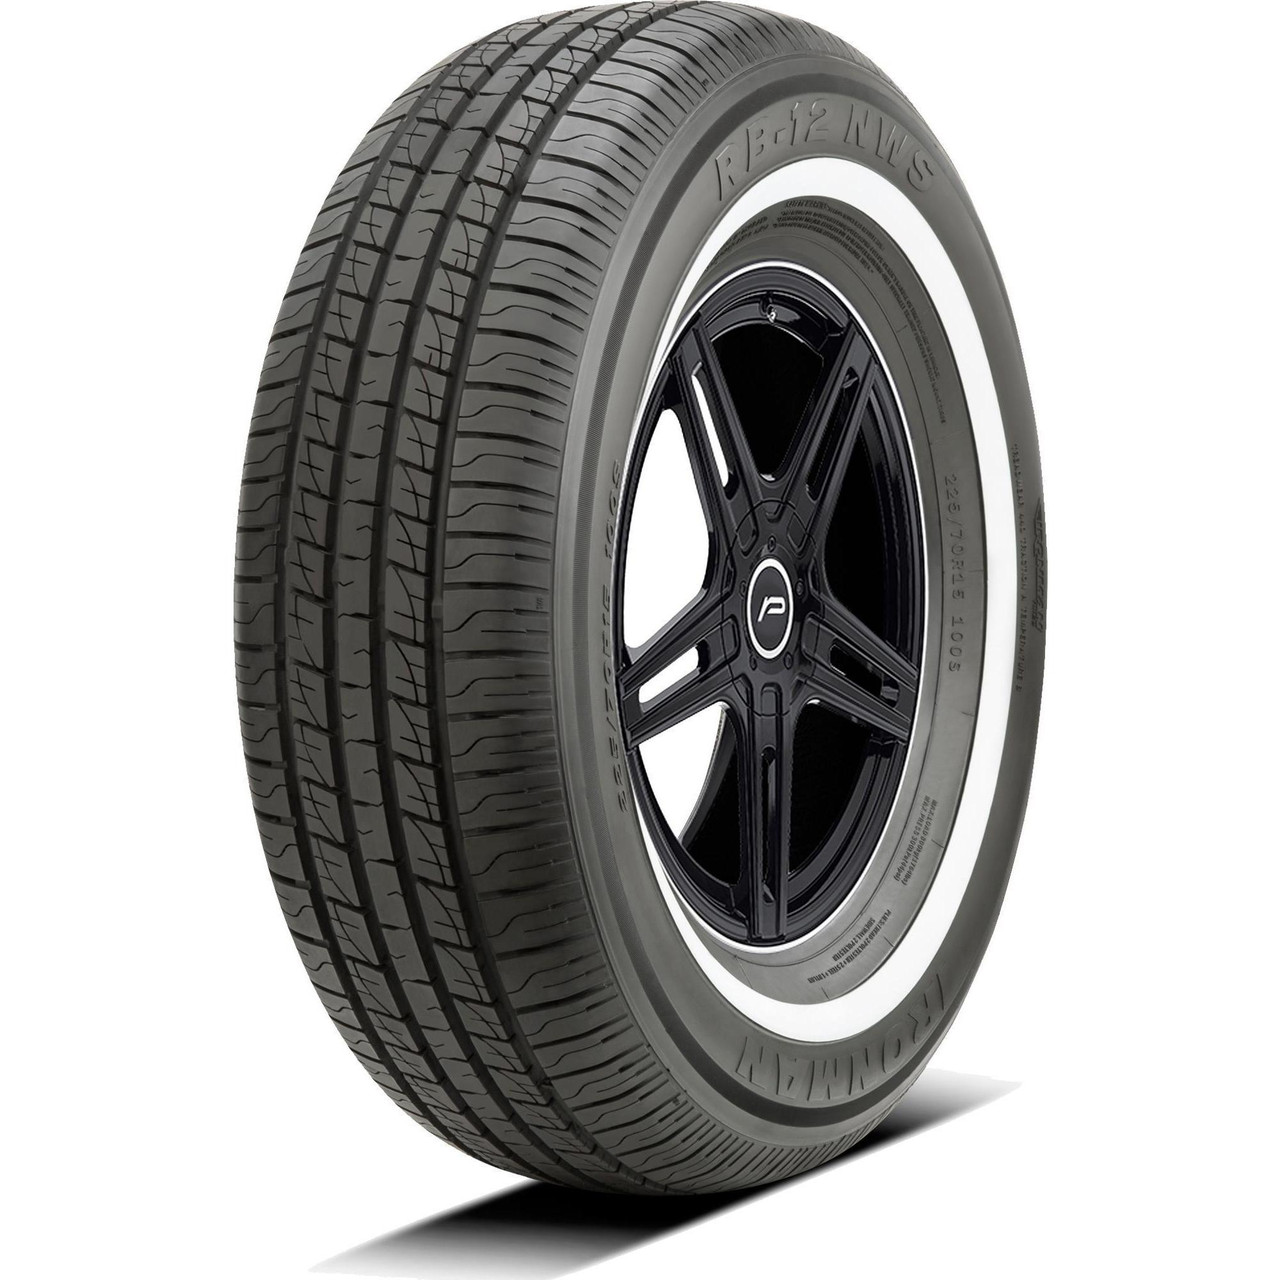 225/75R15 102S IRONMAN RB12 NWS WHITE WALL